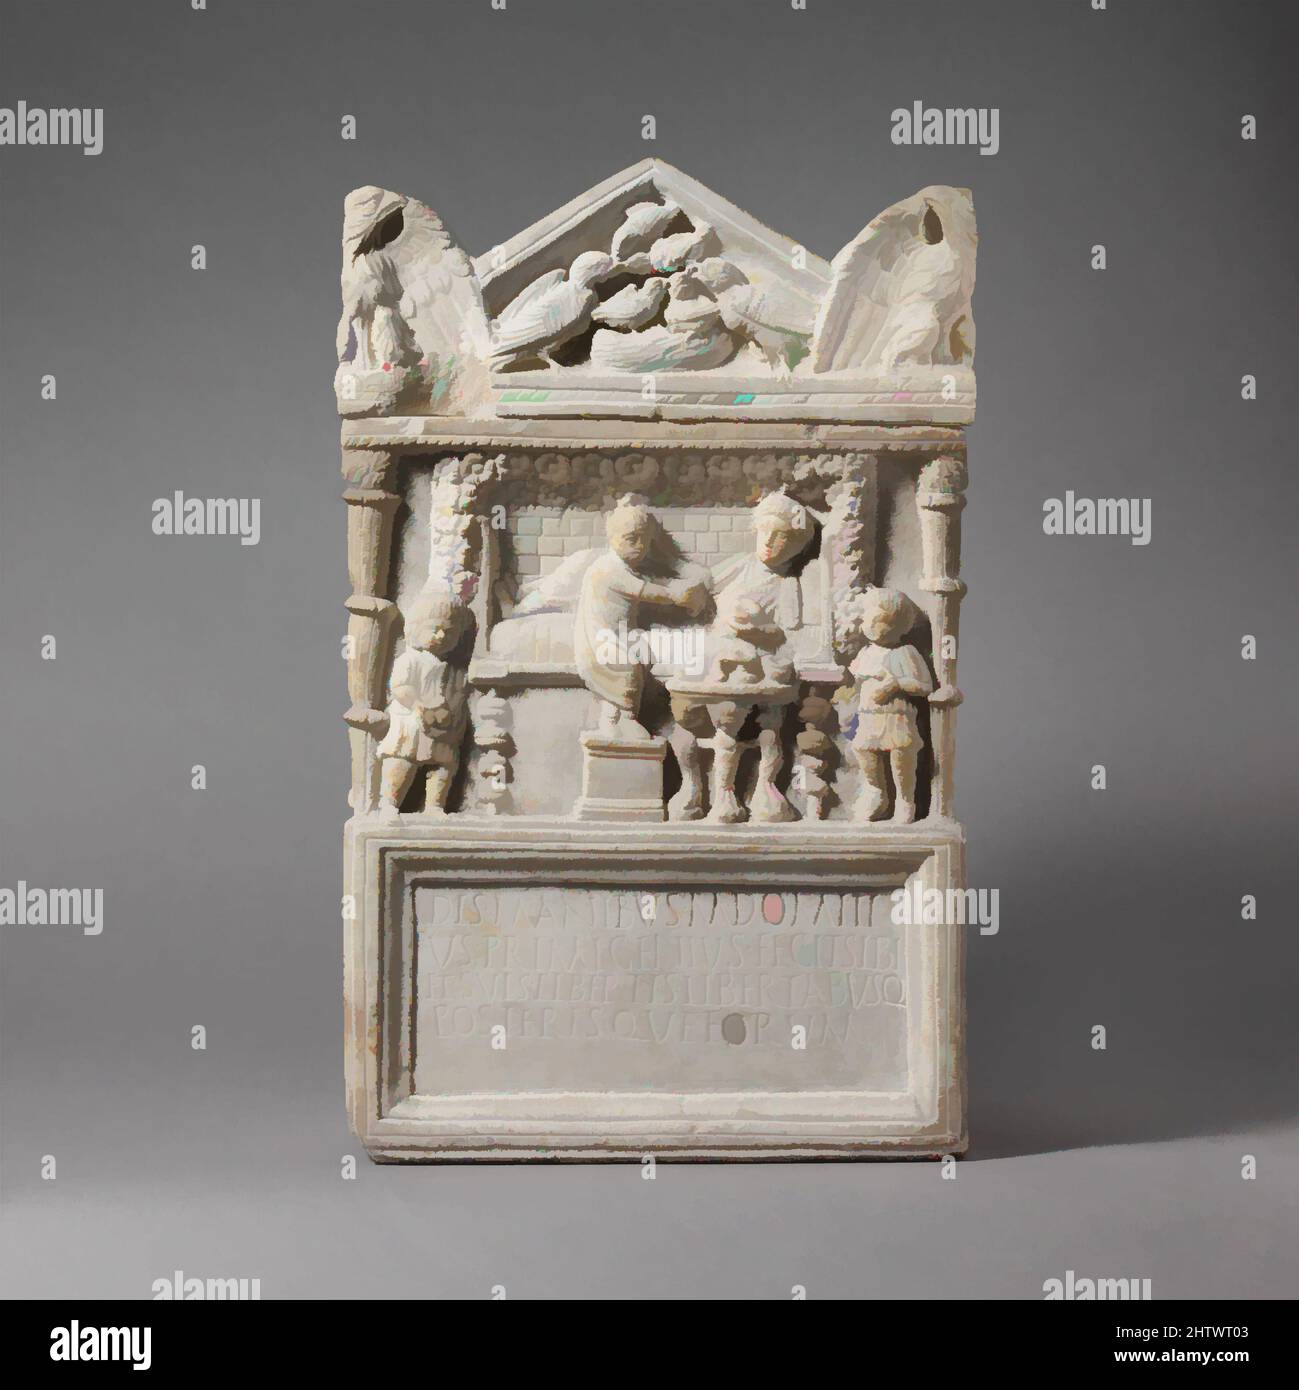 Art inspired by Marble cinerary chest with lid, Imperial, Flavian or Trajanic, ca. A.D. 90–110, Roman, Marble, H. with cover 21 3/8 in. (54.3 cm), Stone Sculpture, The Latin inscription reads: 'To the spirits of the dead. M. Domitius Primigenius made this for himself, his freedmen and, Classic works modernized by Artotop with a splash of modernity. Shapes, color and value, eye-catching visual impact on art. Emotions through freedom of artworks in a contemporary way. A timeless message pursuing a wildly creative new direction. Artists turning to the digital medium and creating the Artotop NFT Stock Photo